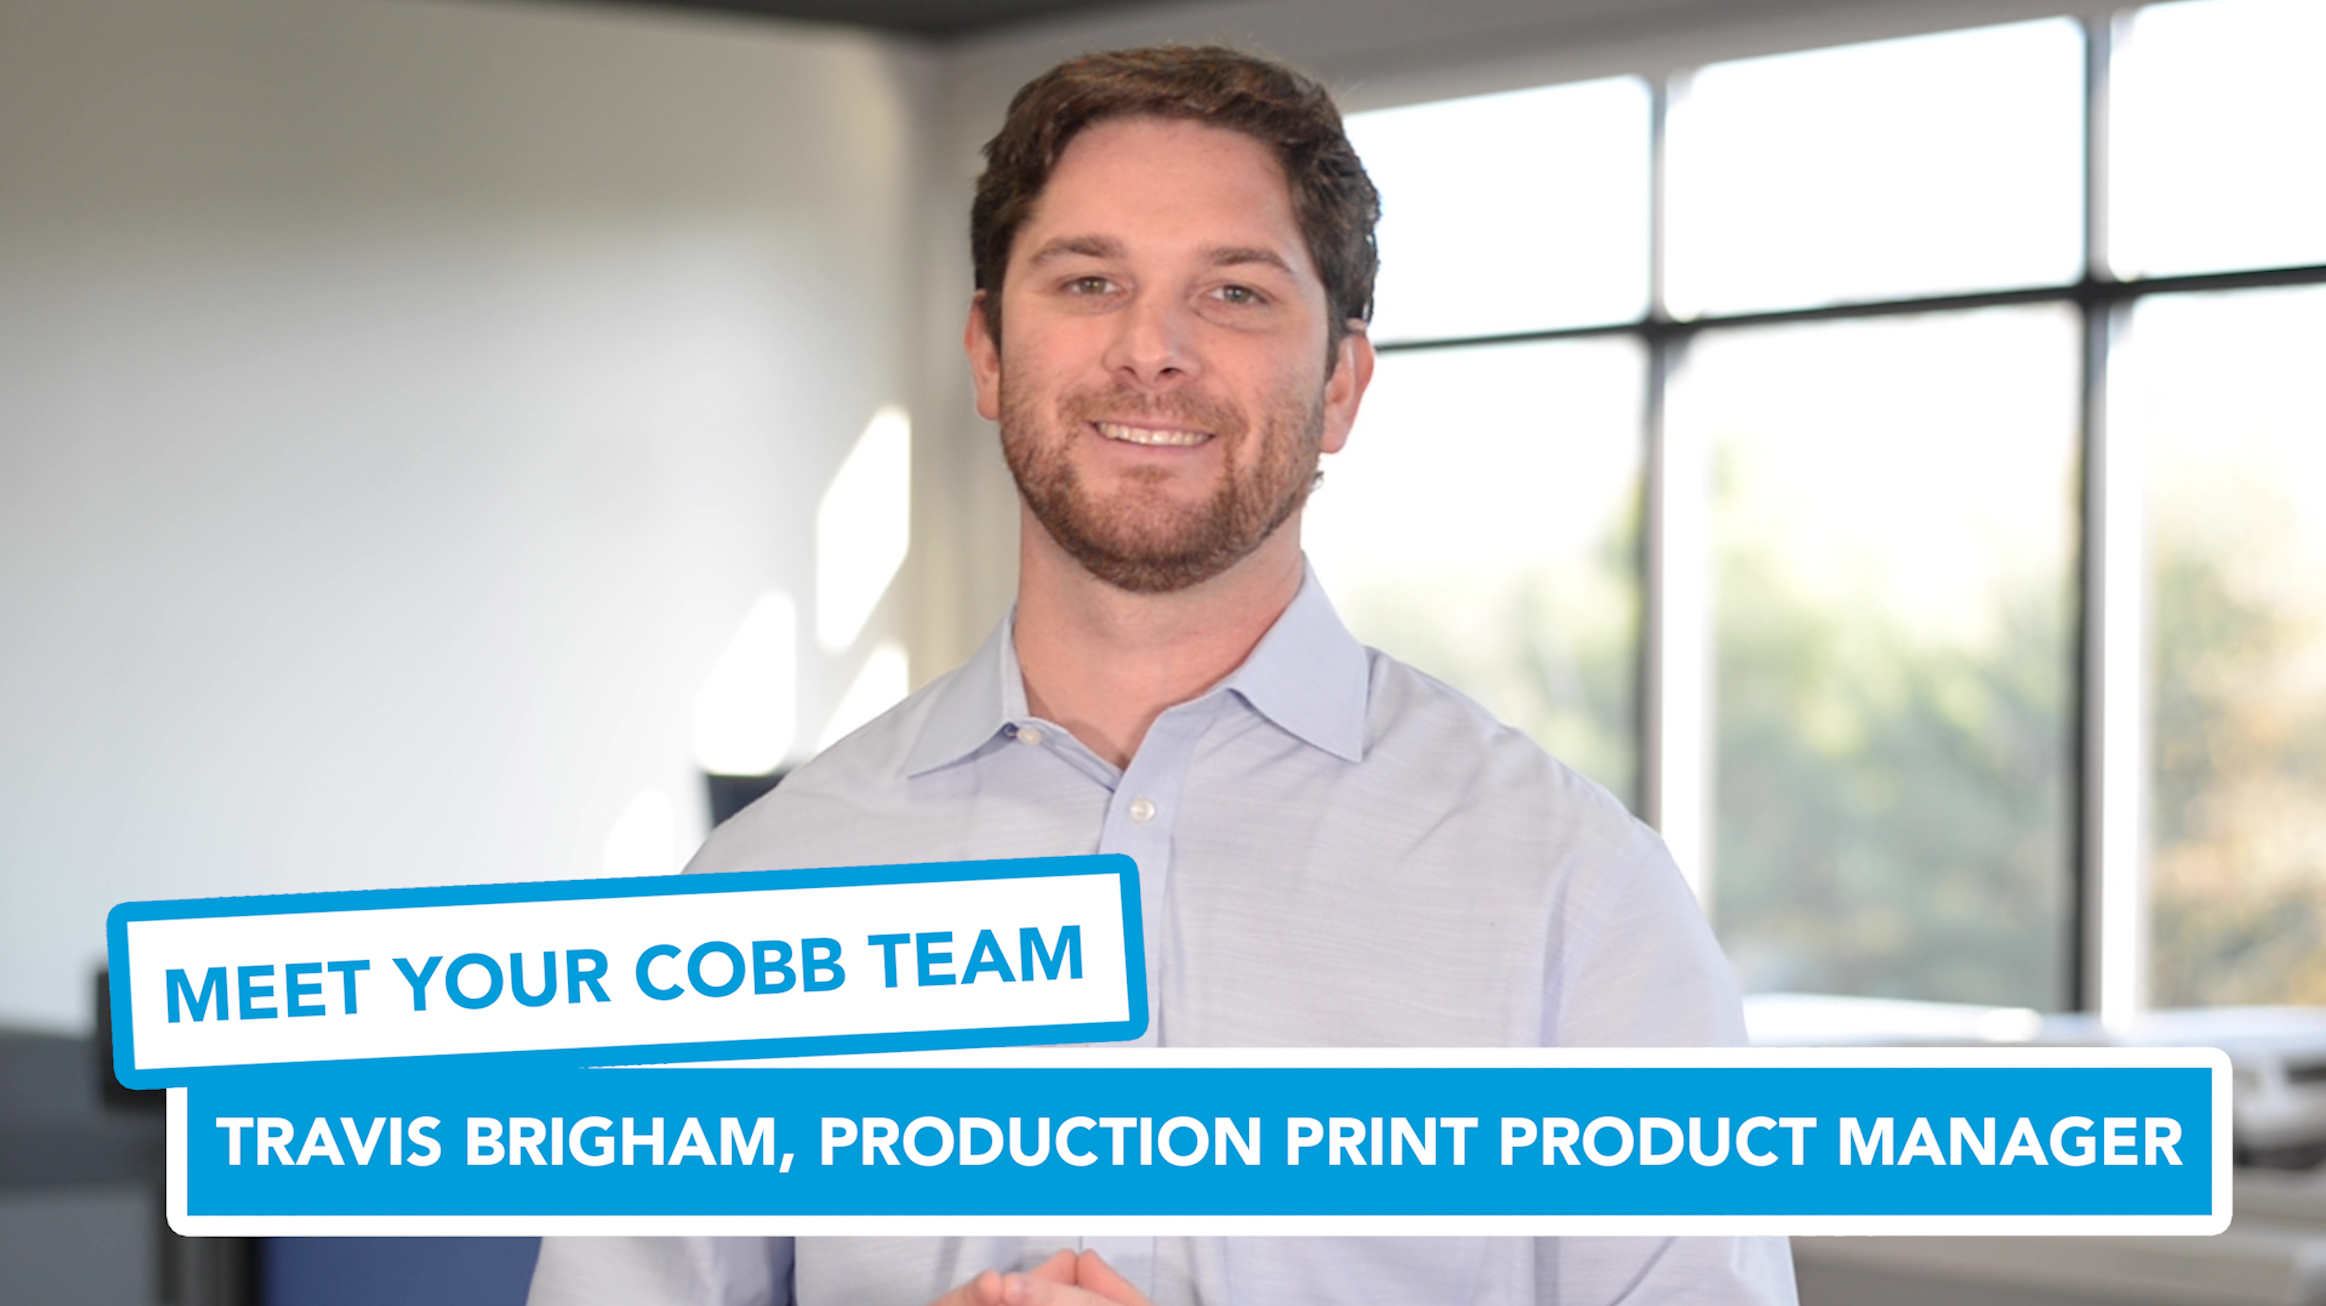 Meet Your Cobb Team: Travis Brigham, Production Print Product Manager